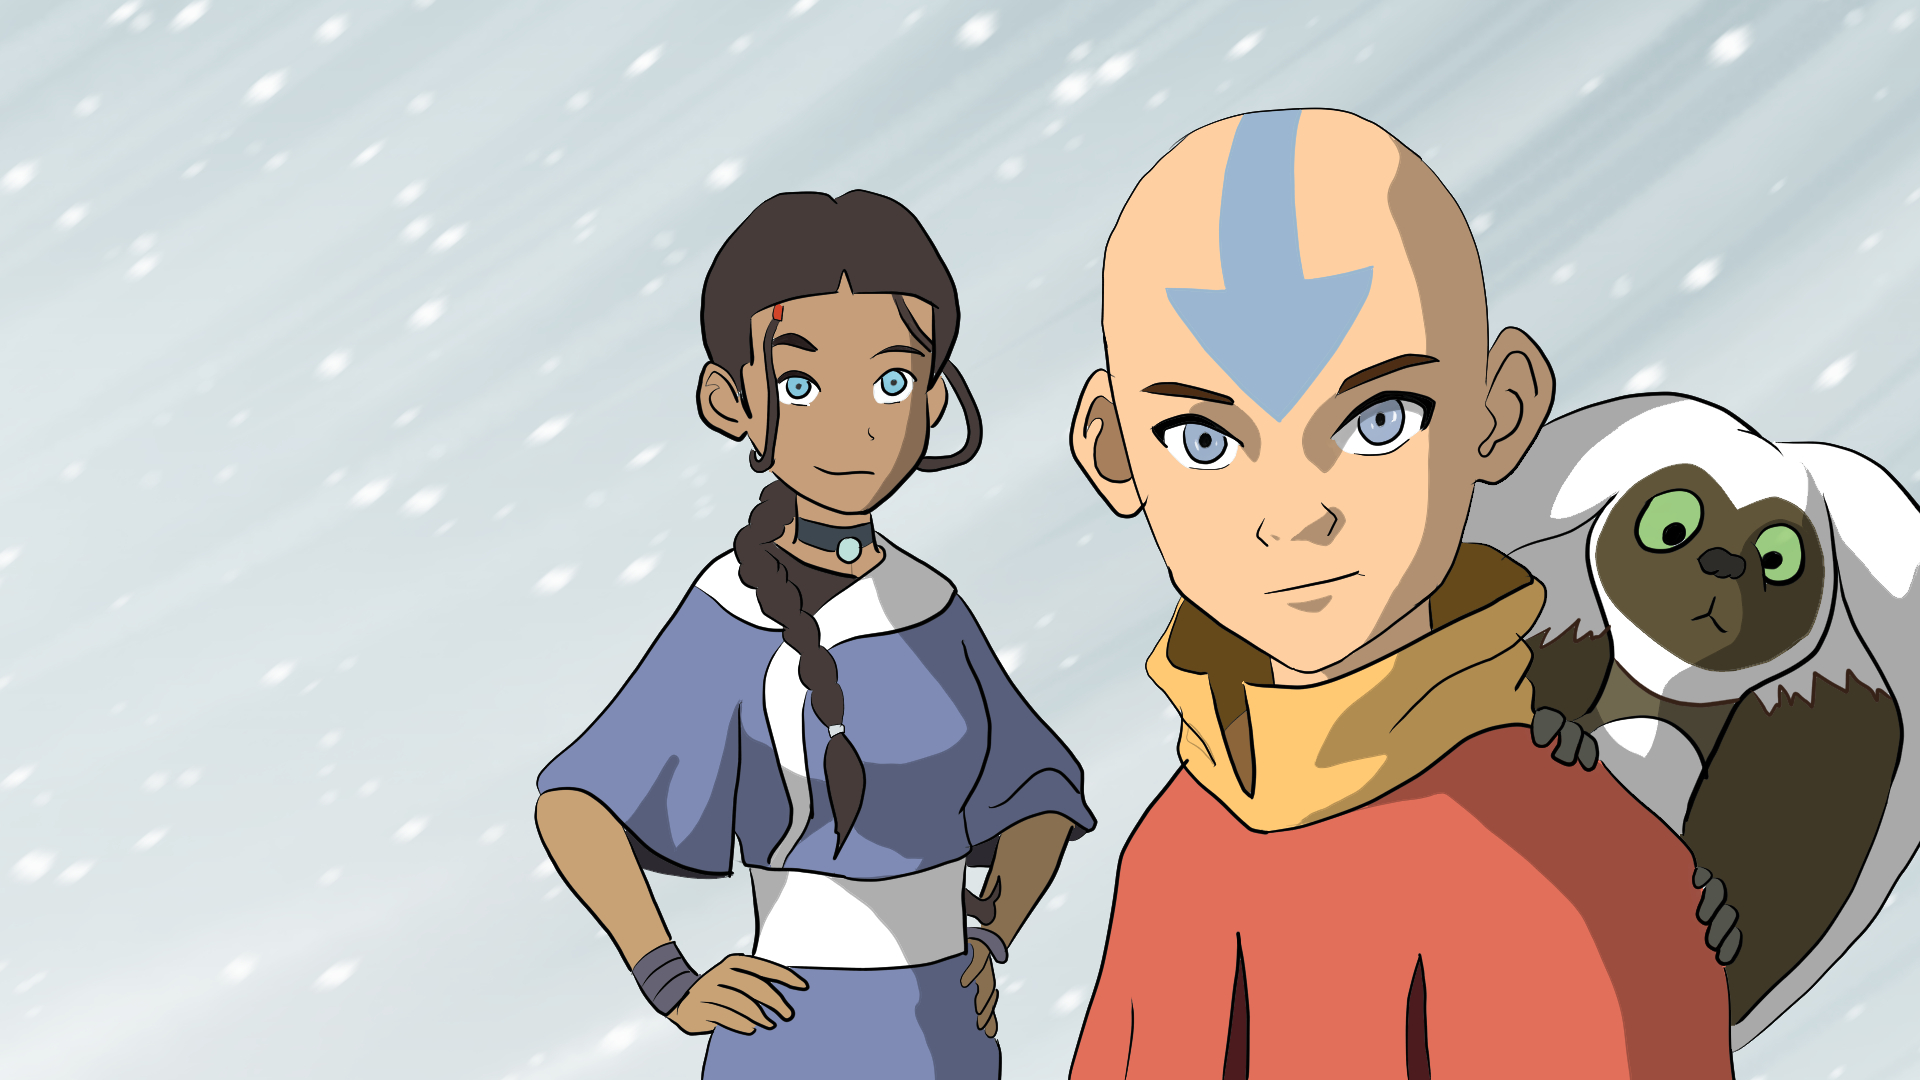 Avatar the last airbender subtitles. Аватар аанг.